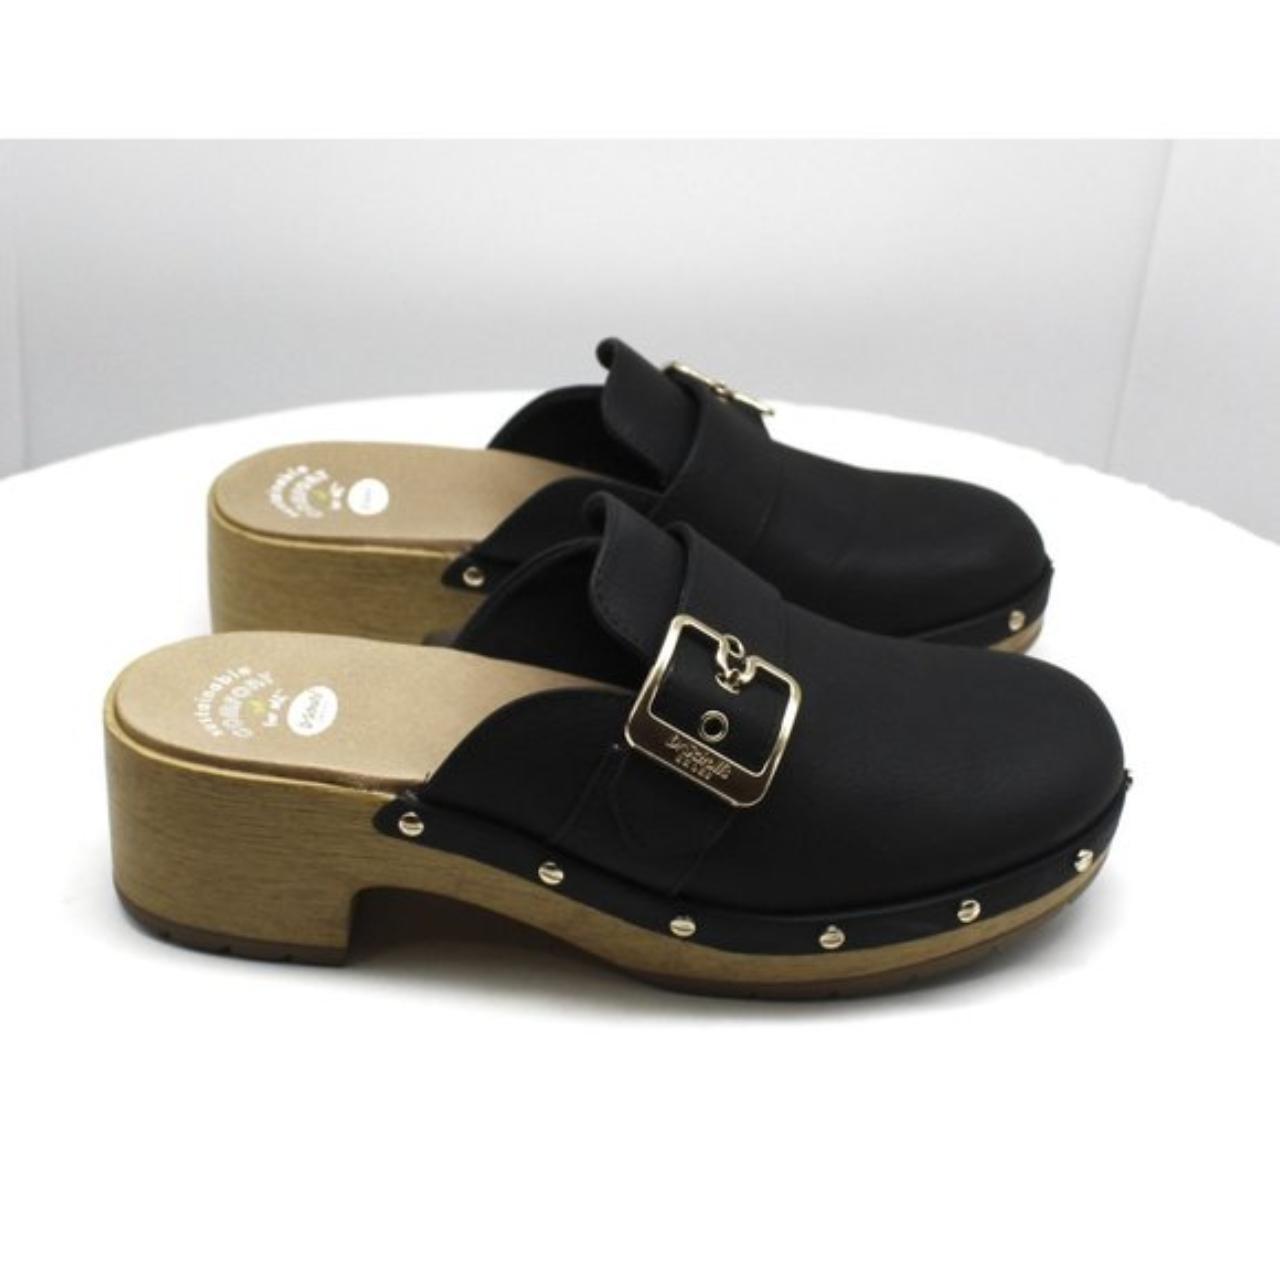 Product Image 2 - Dr. Scholl's Women's Classic Clog